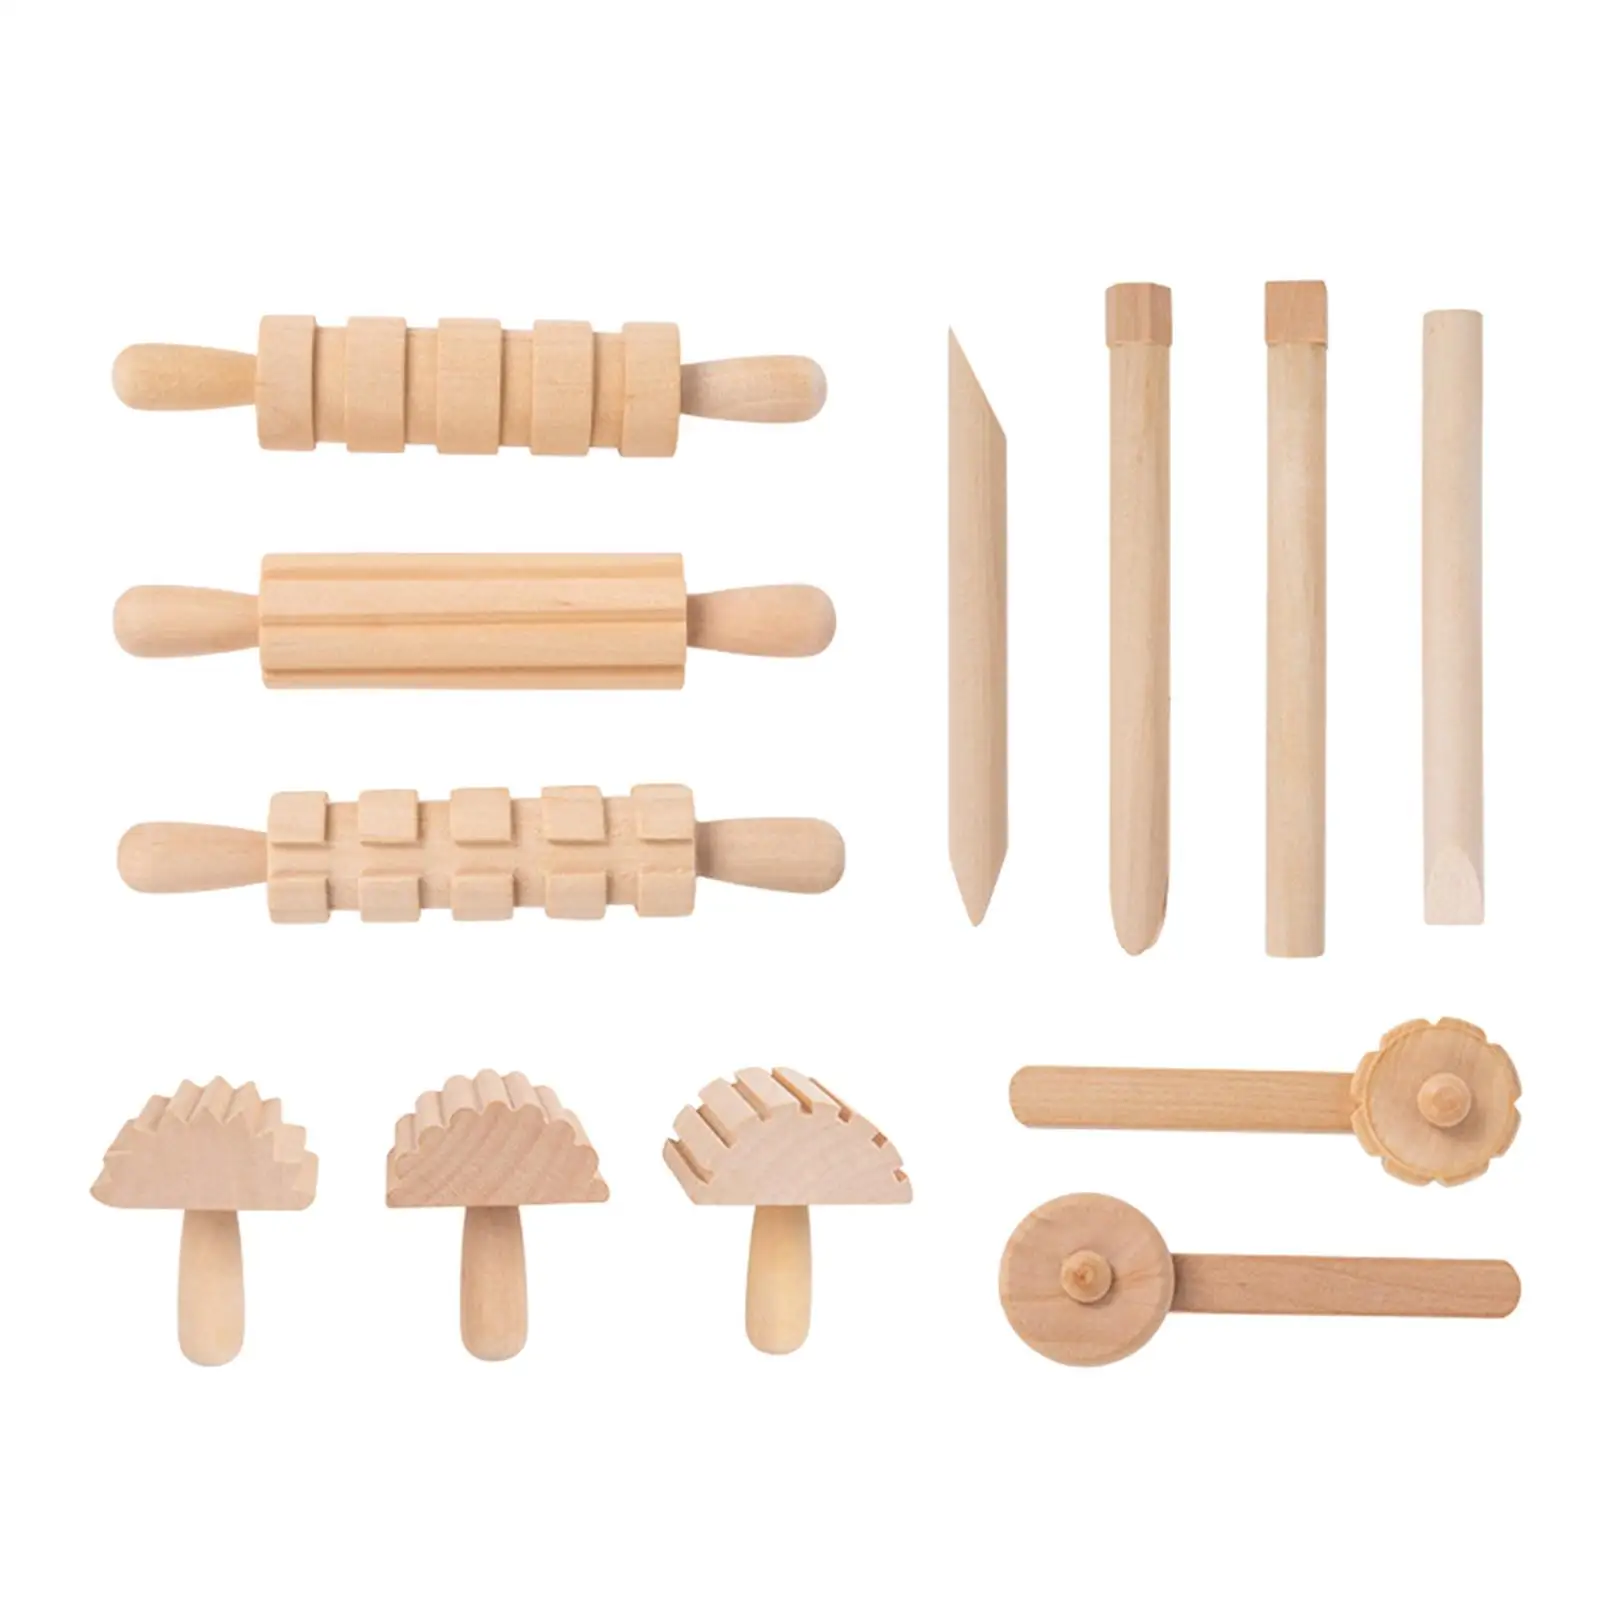 Wooden Tools Set, 12 Pieces Cookie DIY Handmade Baking Accessories  Ages 3 and up Pottery Tools for Birthday Gift Crafts